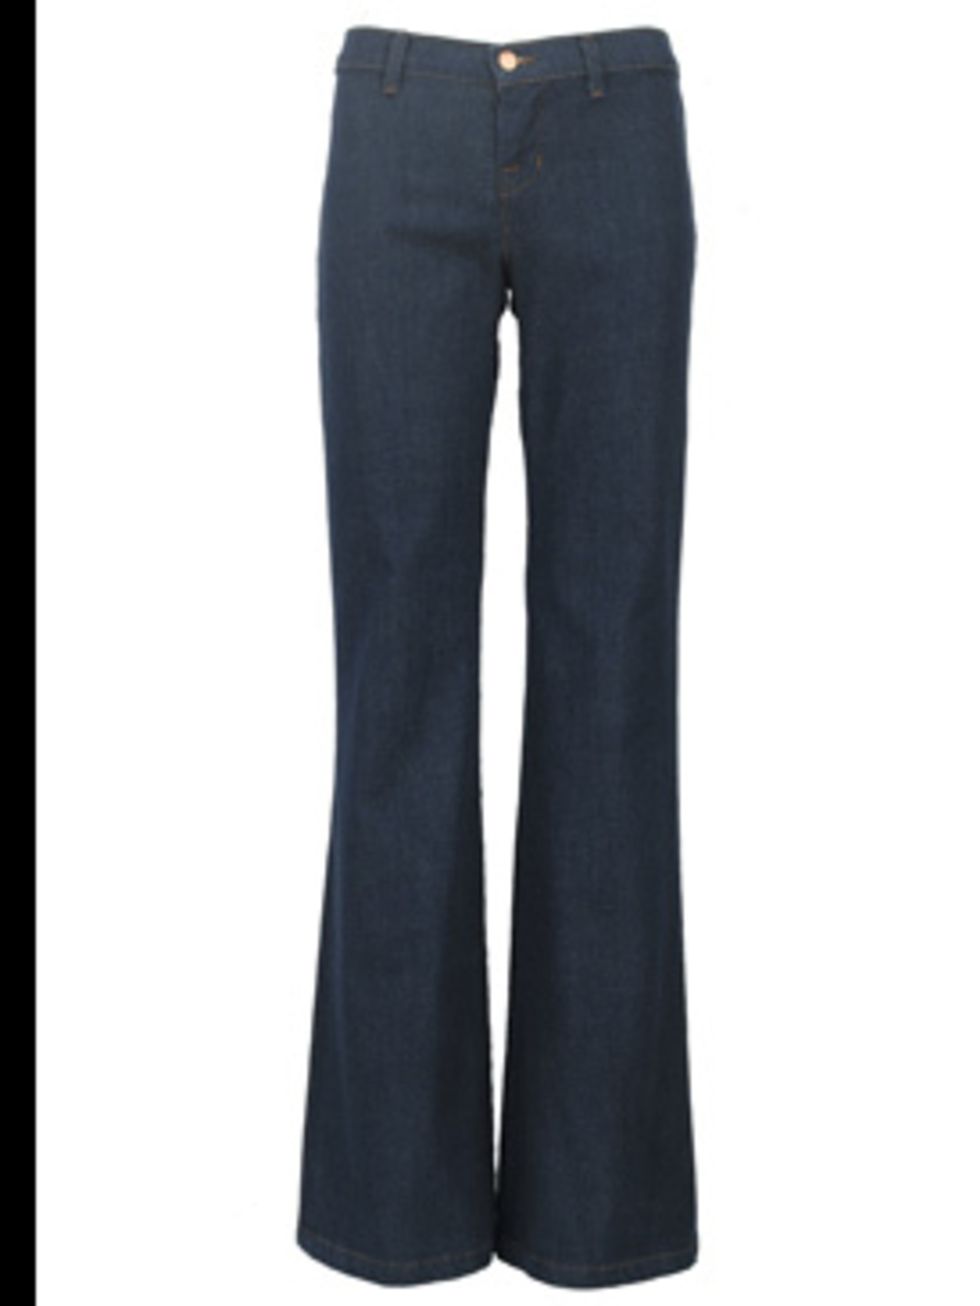 <p>'Marrakesh' jeans £170 by J Brand, available from Selfridges 0800 123 400</p>